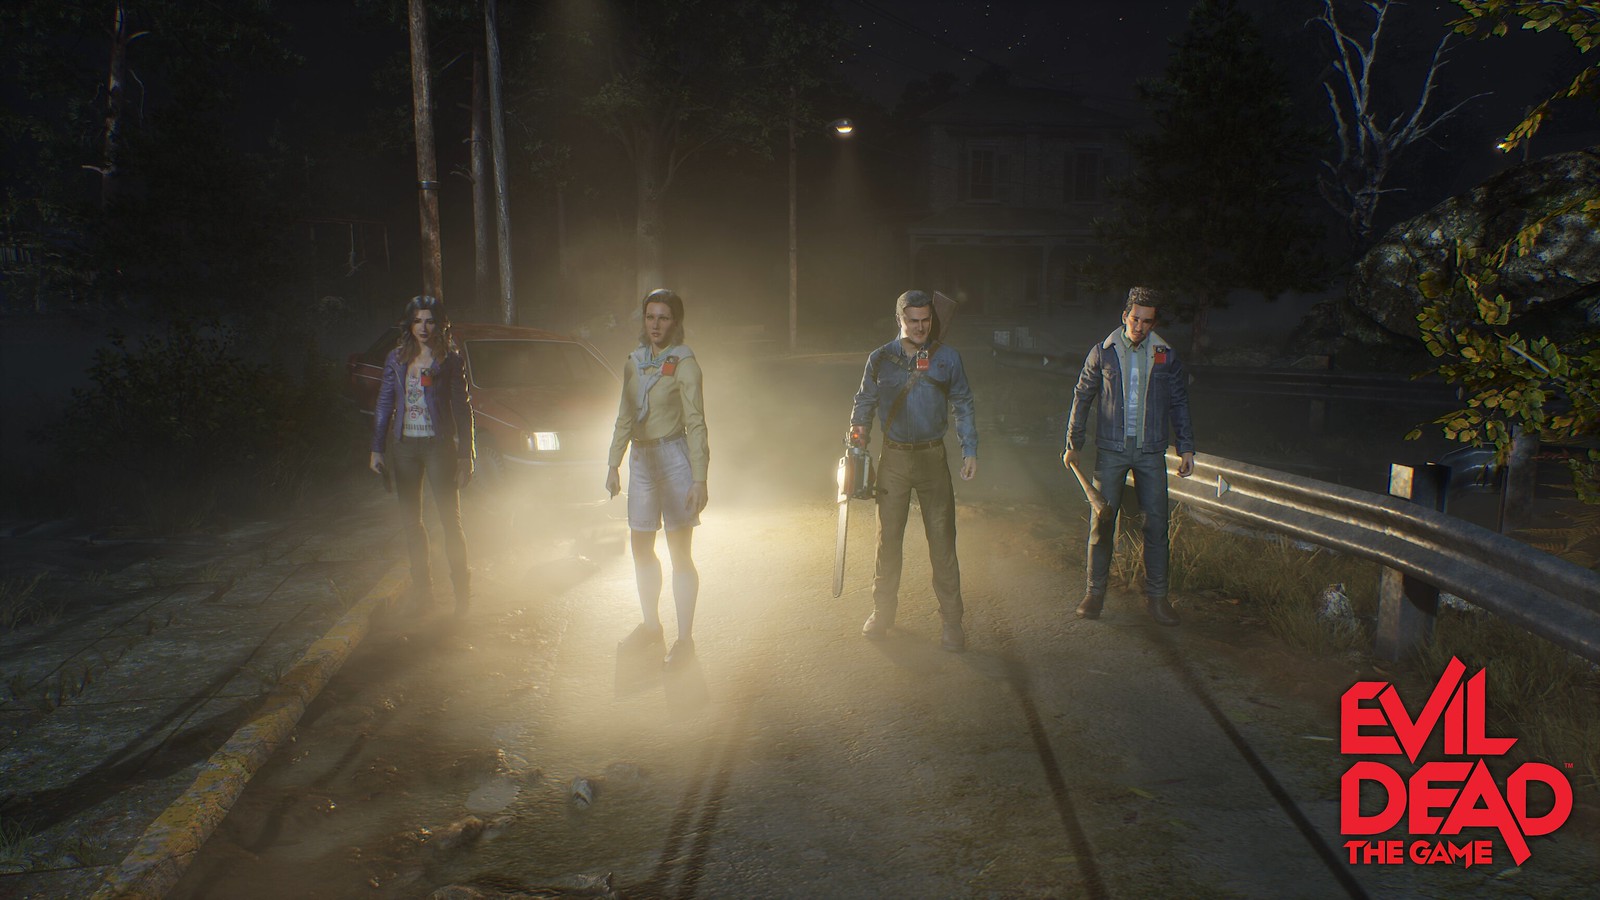 Playstation News: Tips for surviving and slaying in Evil Dead: The Game, out tomorrow